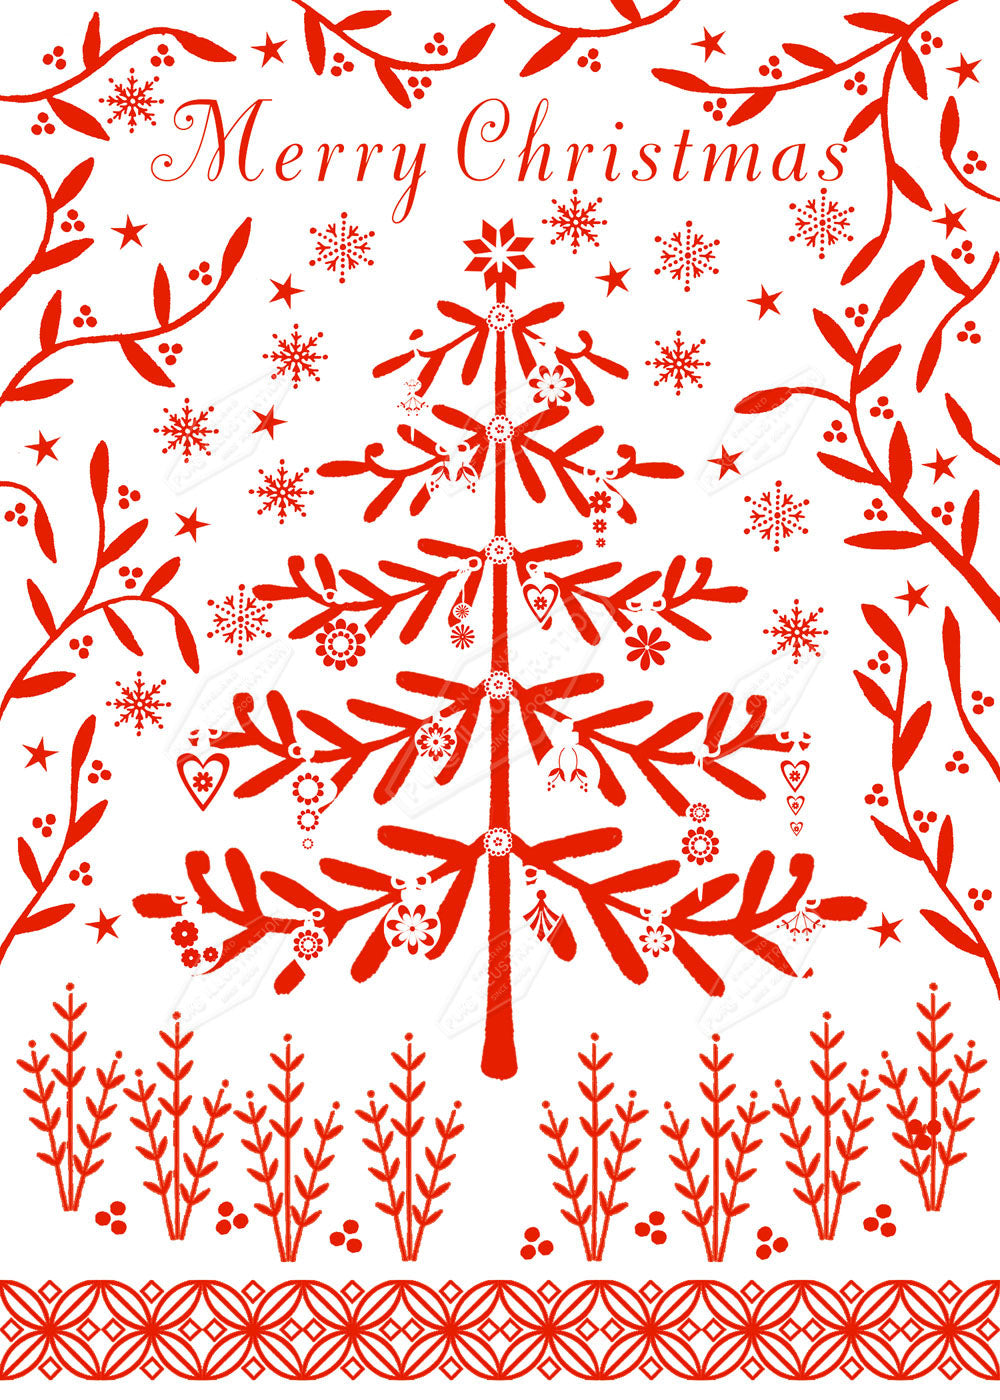 00021883SSNa- Sian Summerhayes is represented by Pure Art Licensing Agency - Christmas Greeting Card Design